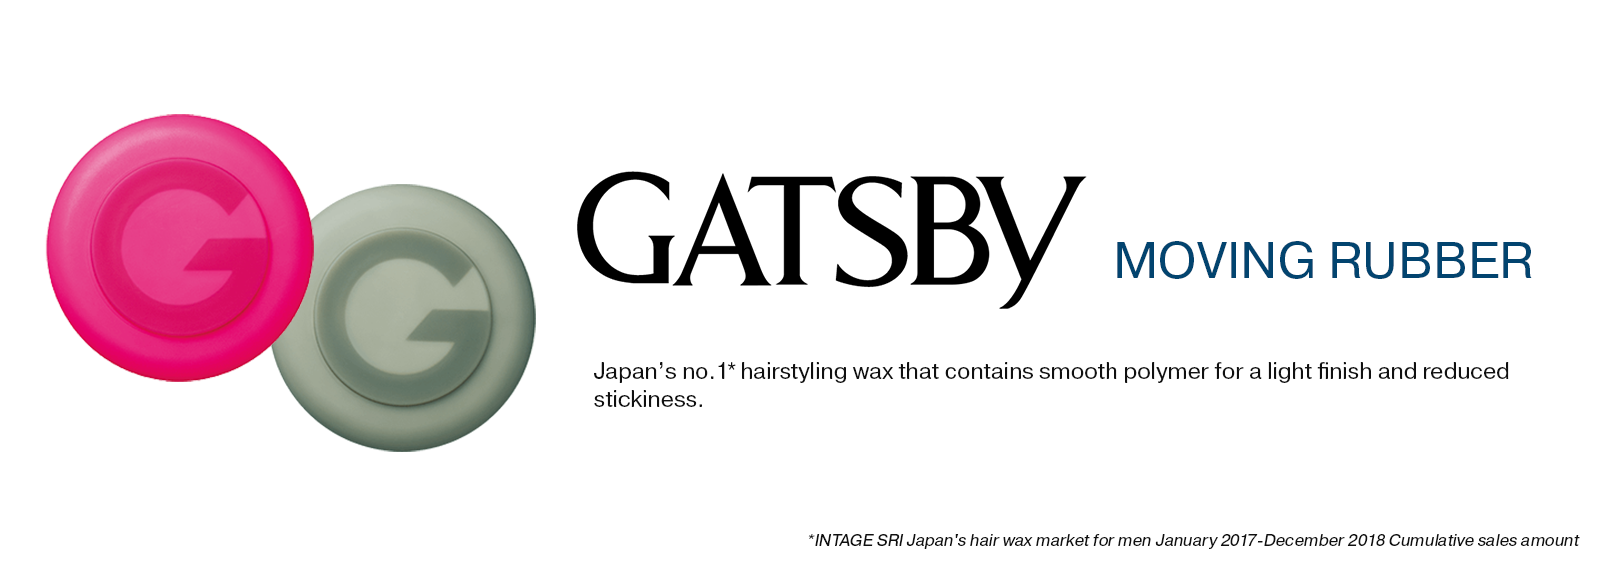 Gatsby Moving Rubber Banner